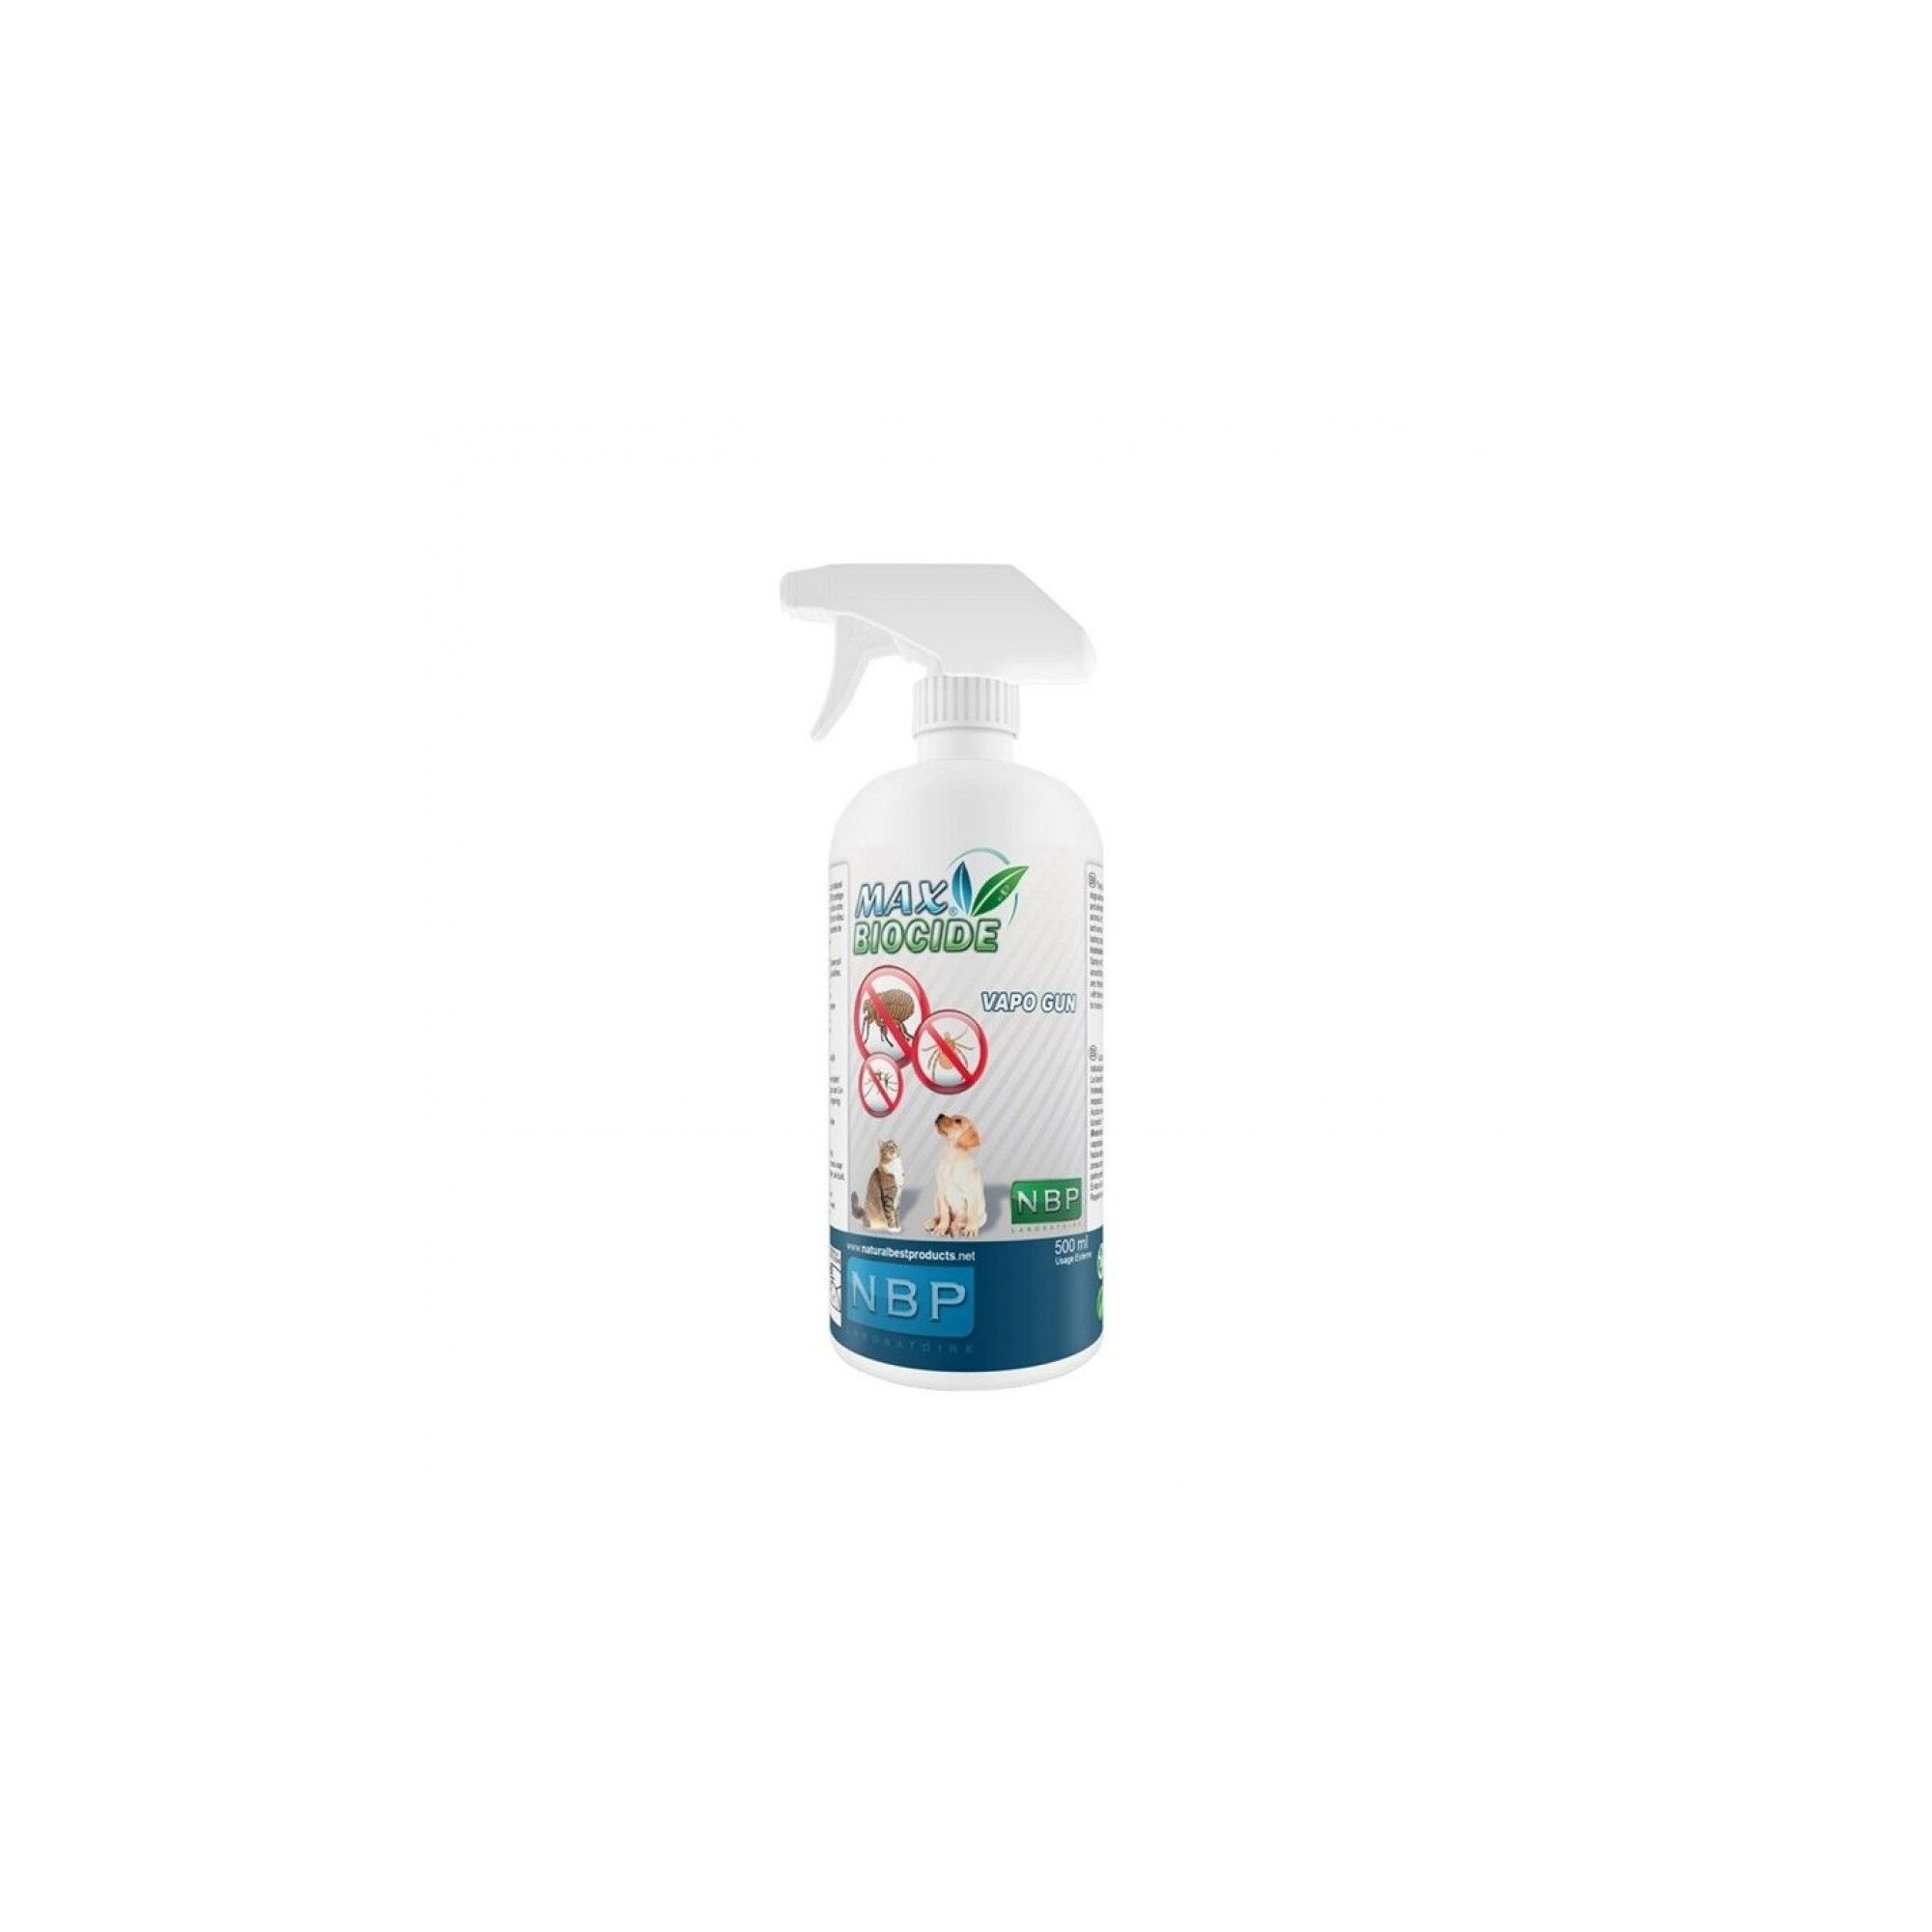 Antiparasitic spray for dogs and cats 200ml